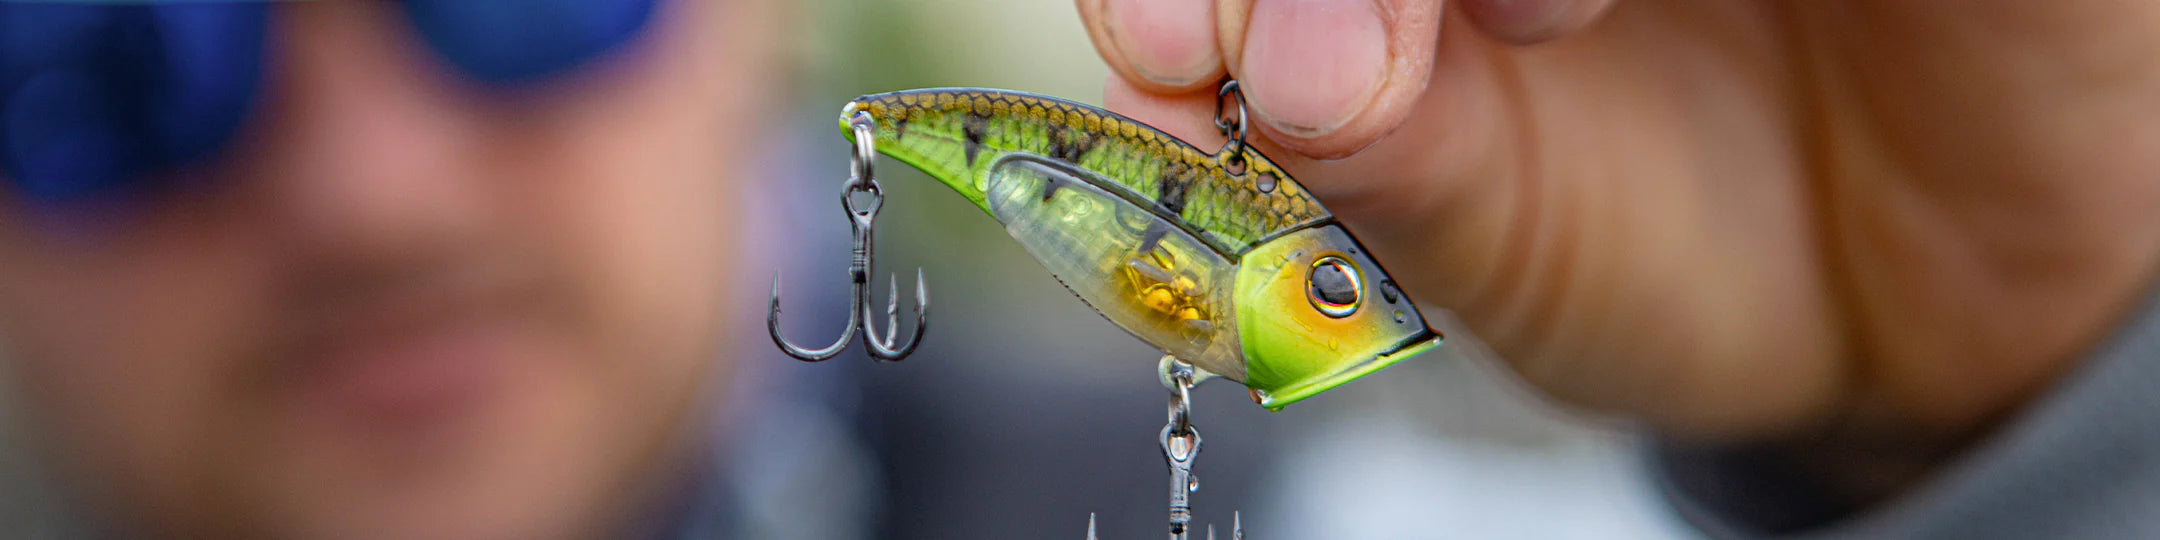 Berkley® Fishing is your one-stop shop for fishing baits